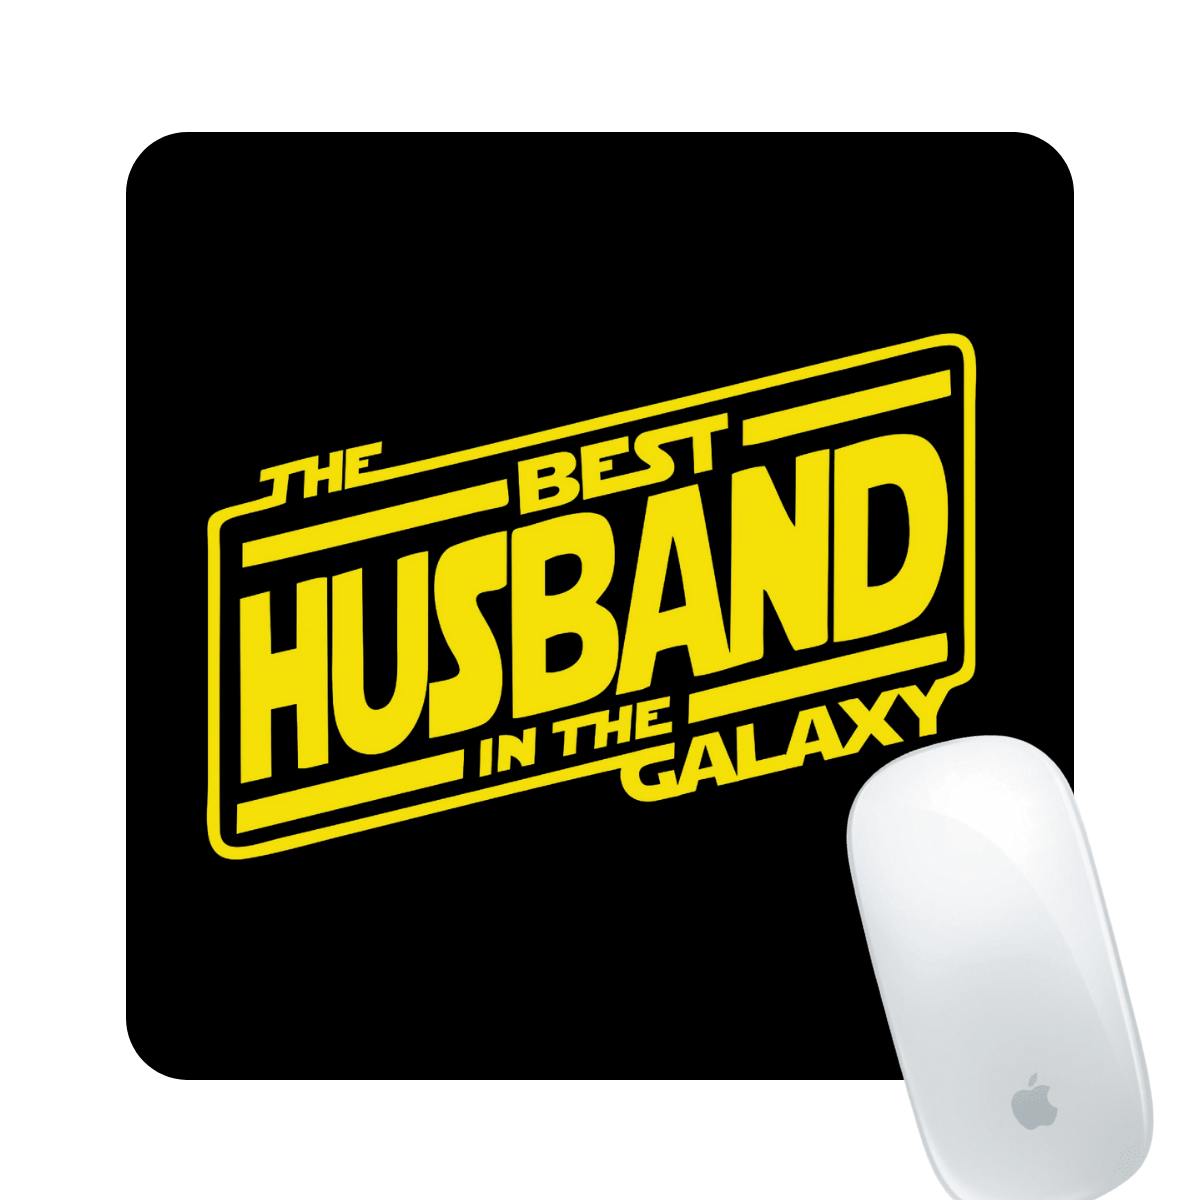 MOUSE PAD BEST HUSBAND